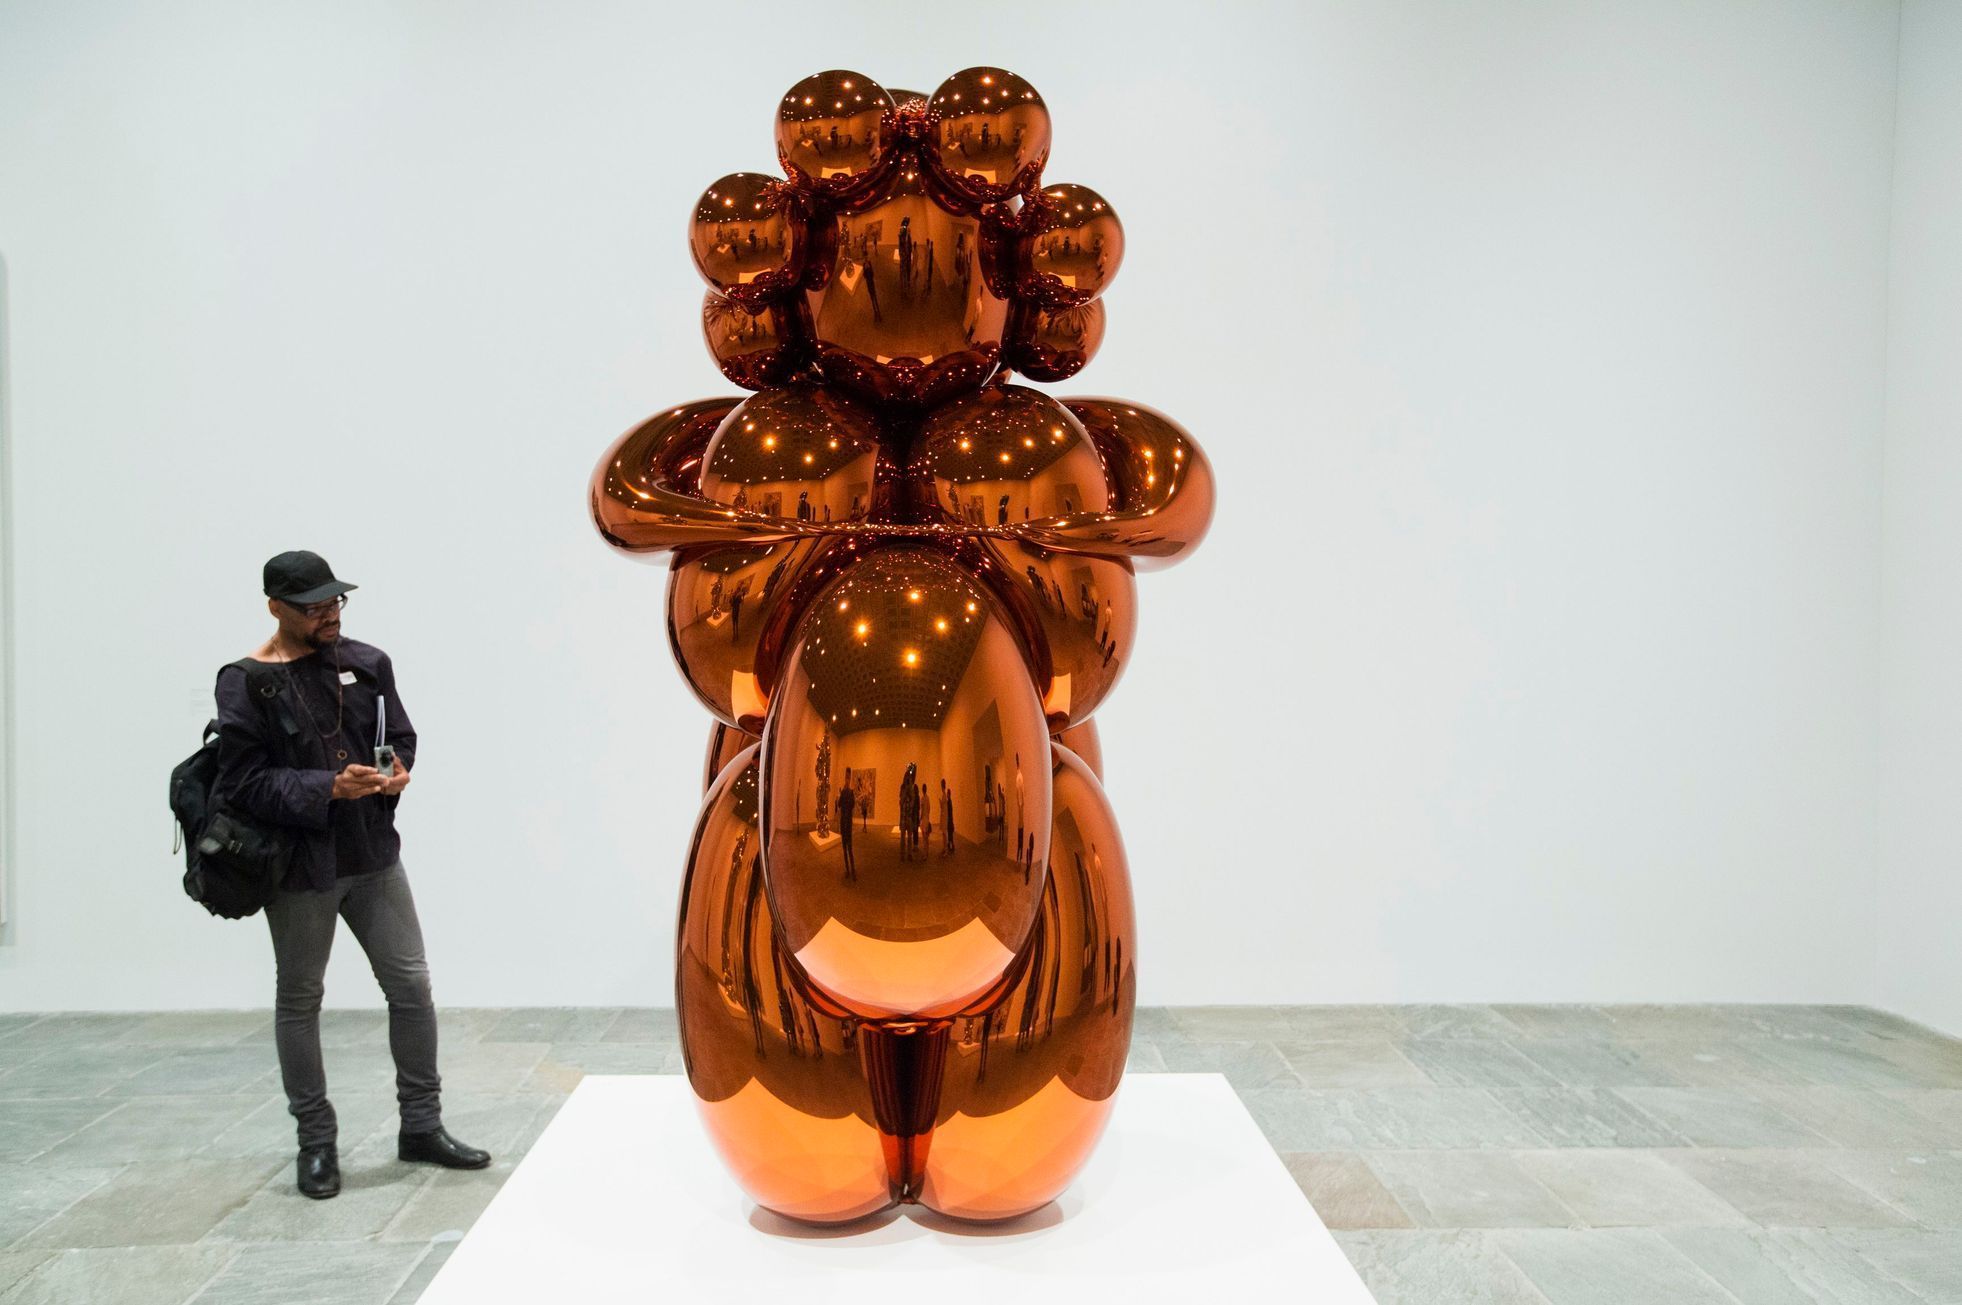 A man looks at a sculpture before the opening of a Jeff Koons retrospective at the Whitney Museum of American Art in New York